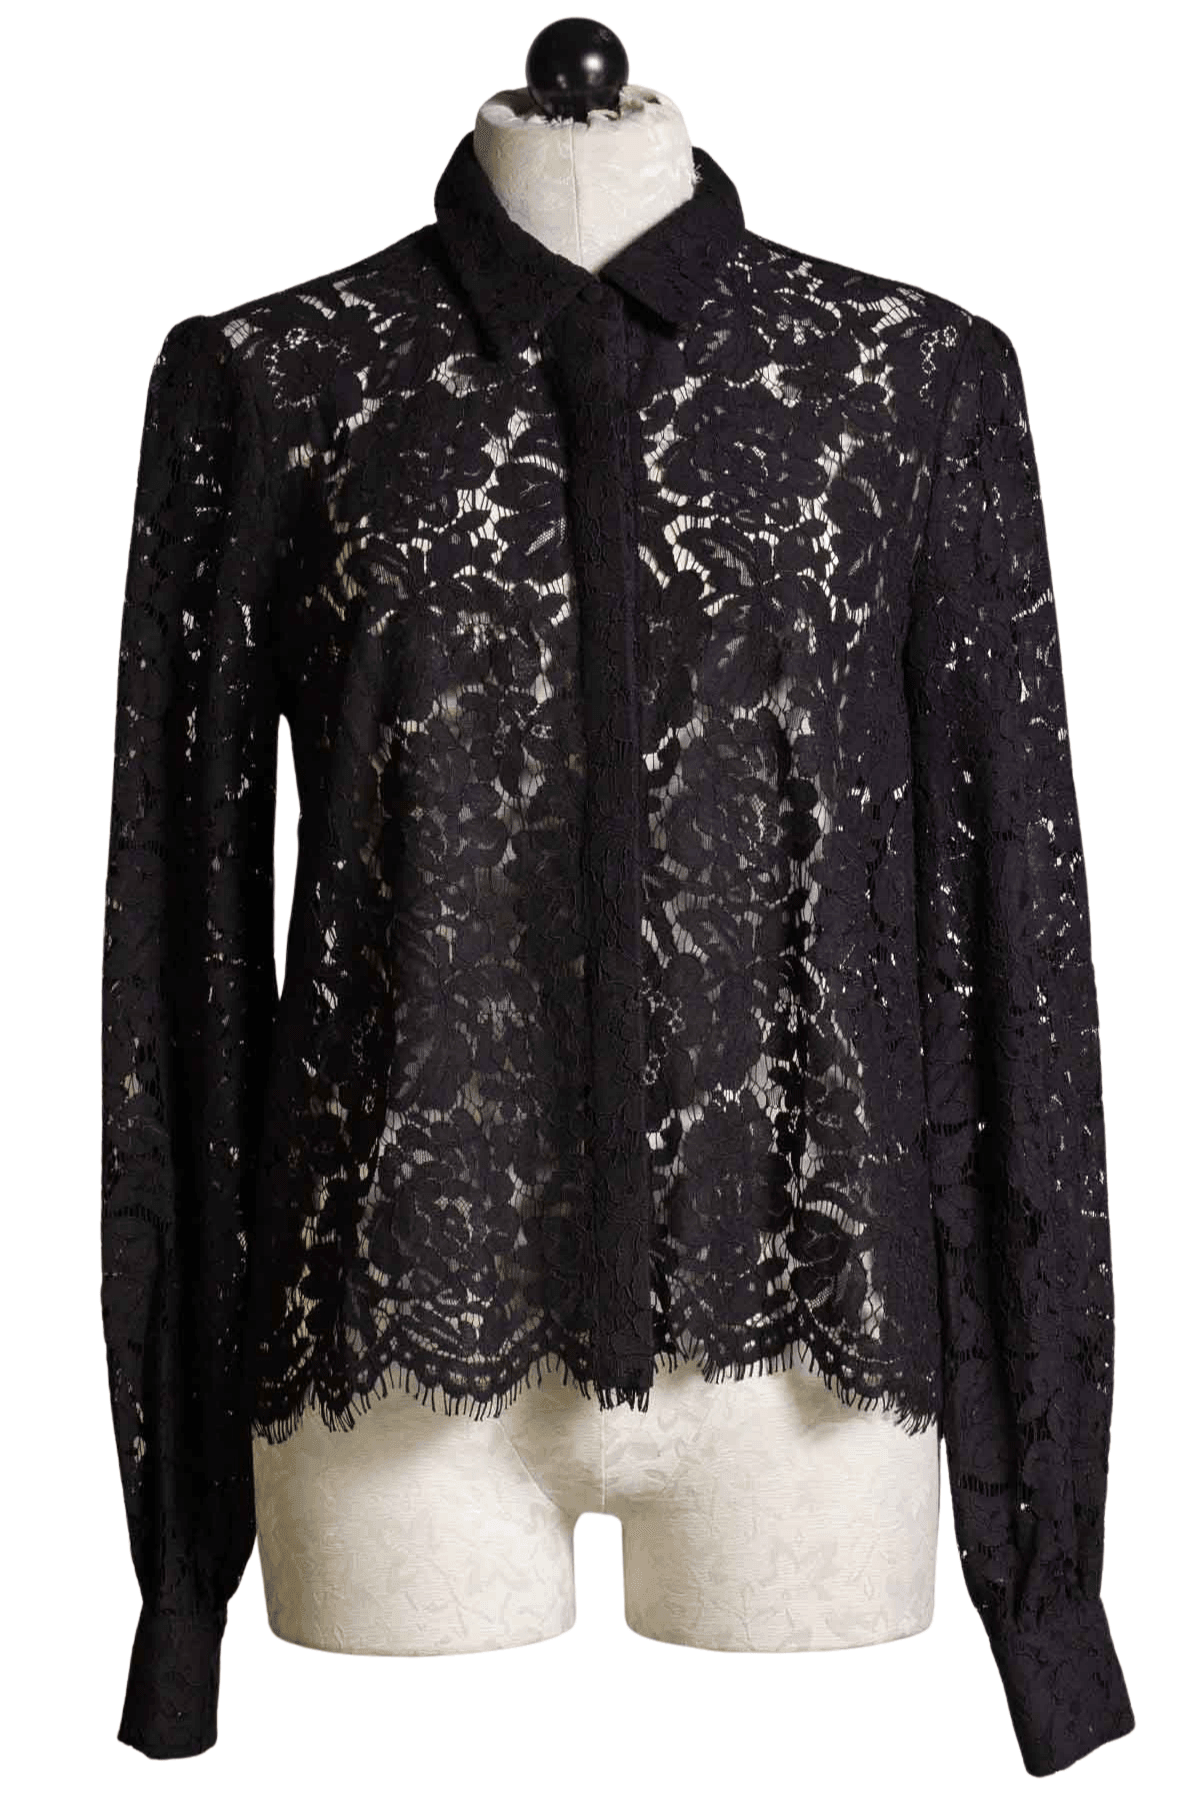 black lace blouse by Generation Love with scalloped hemline